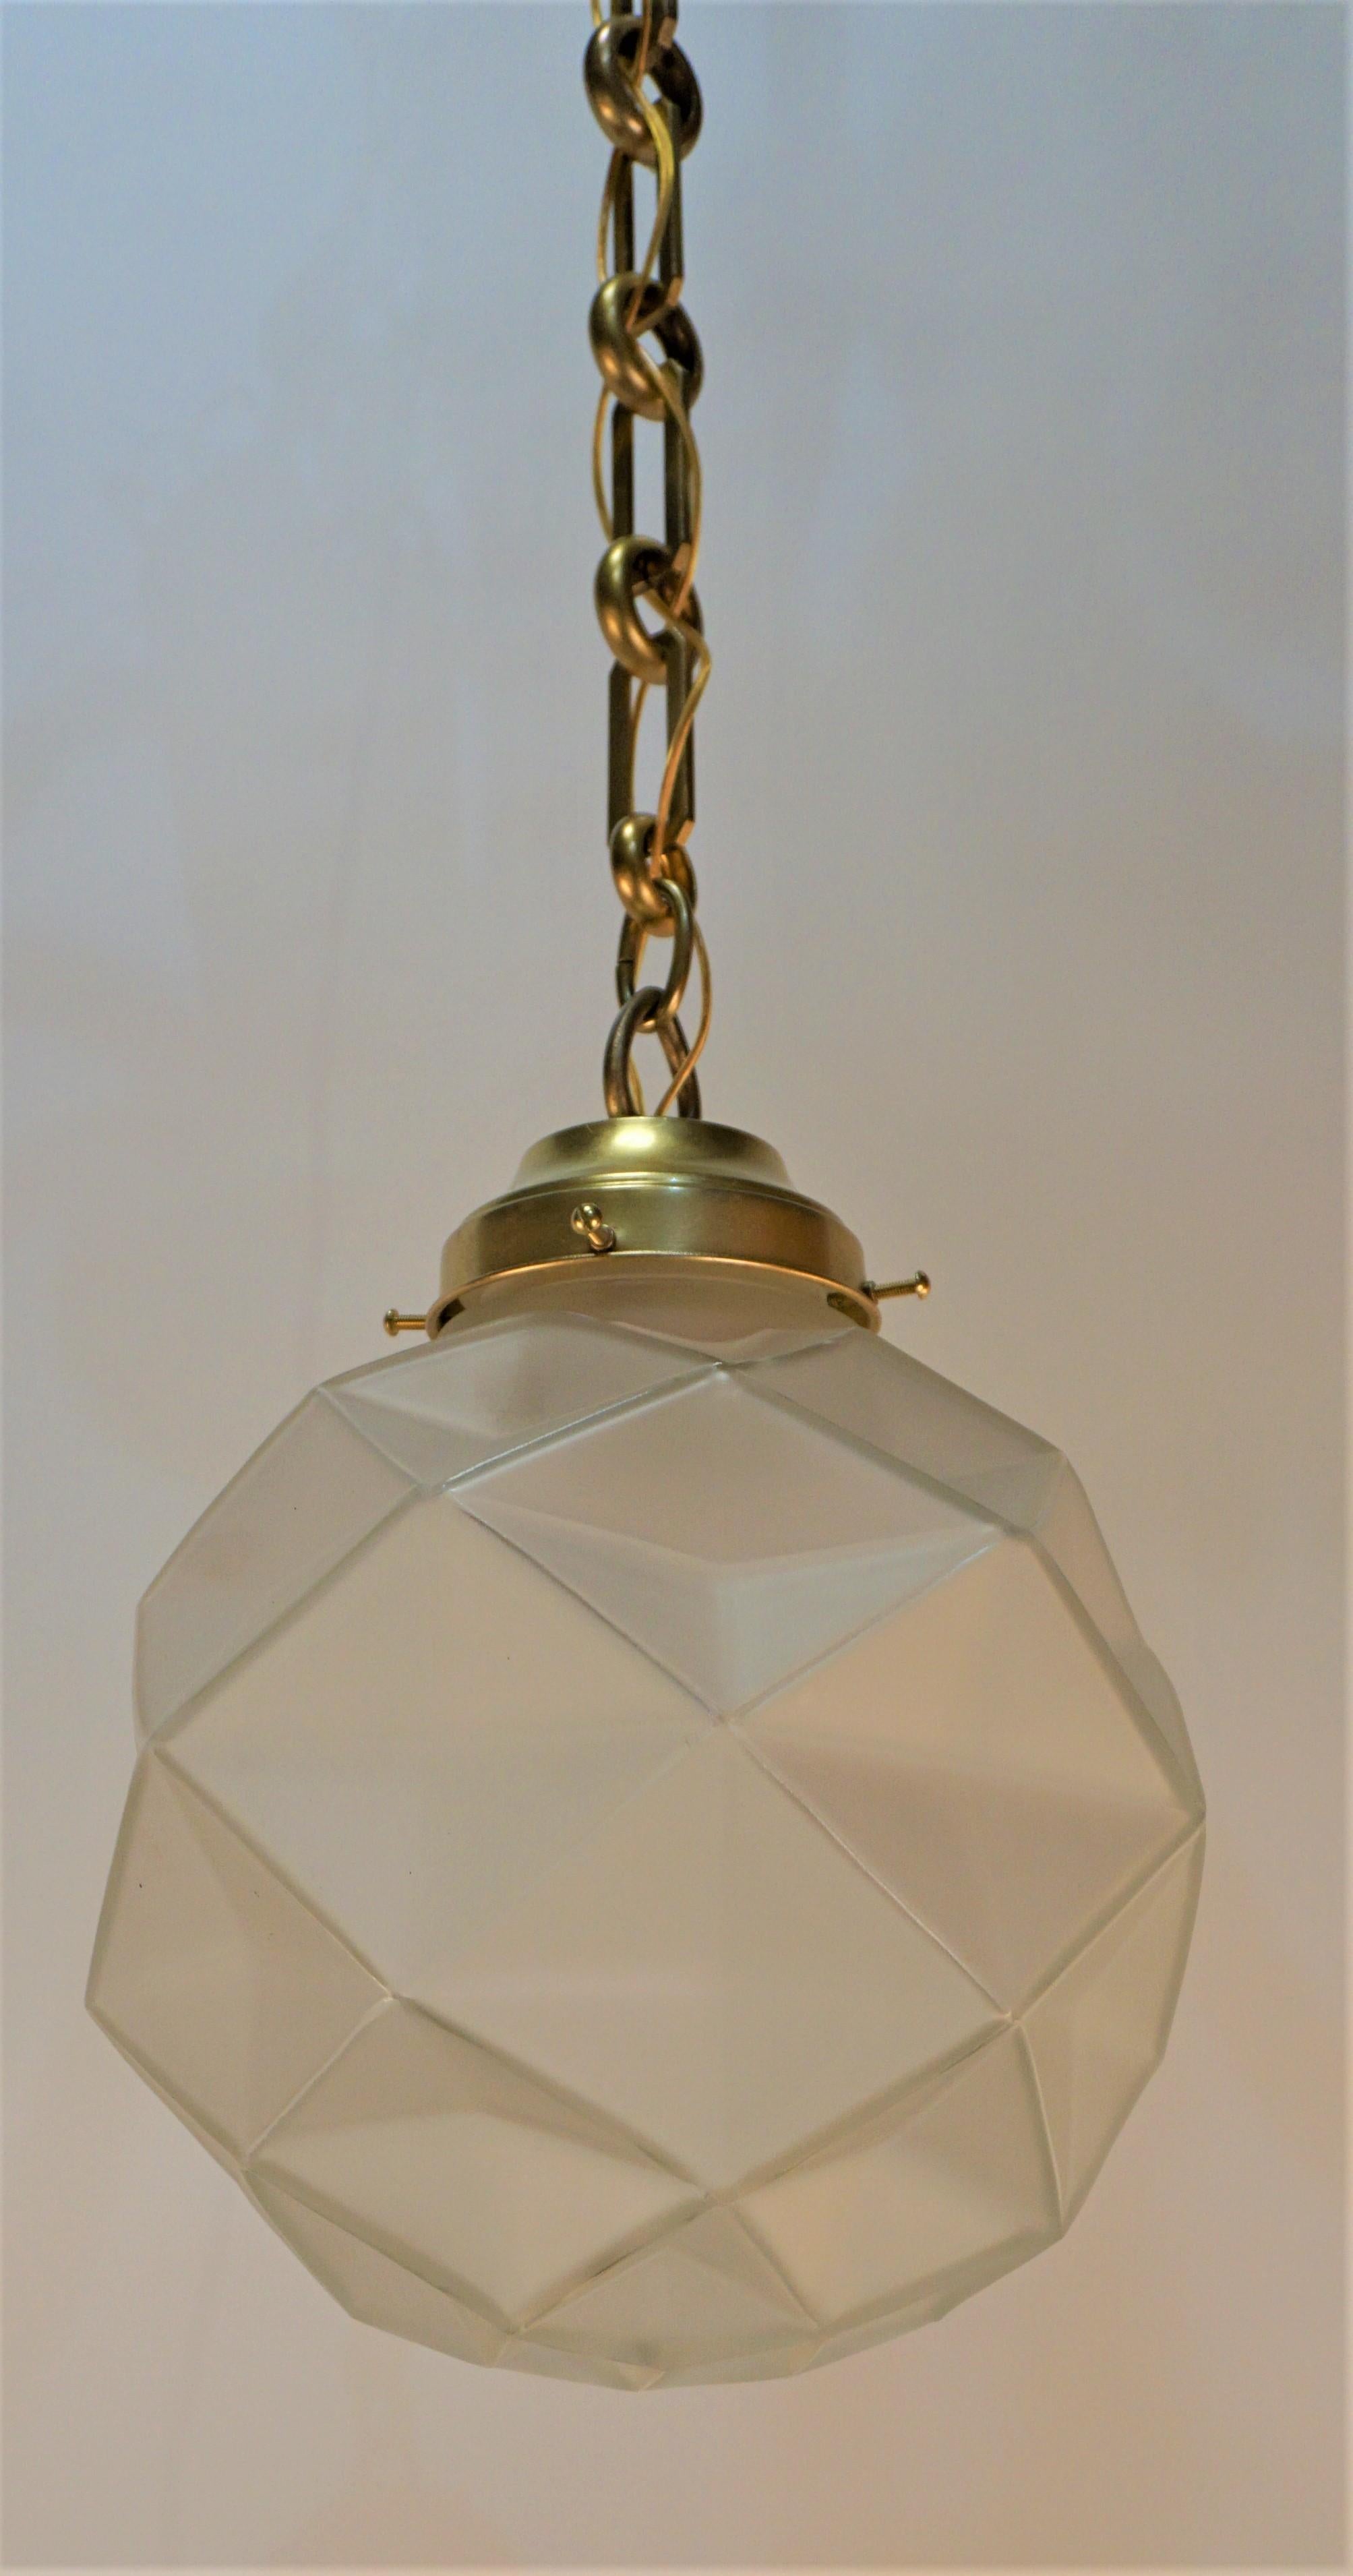 French Art Deco Golbe Pendent/Chandelier For Sale 3